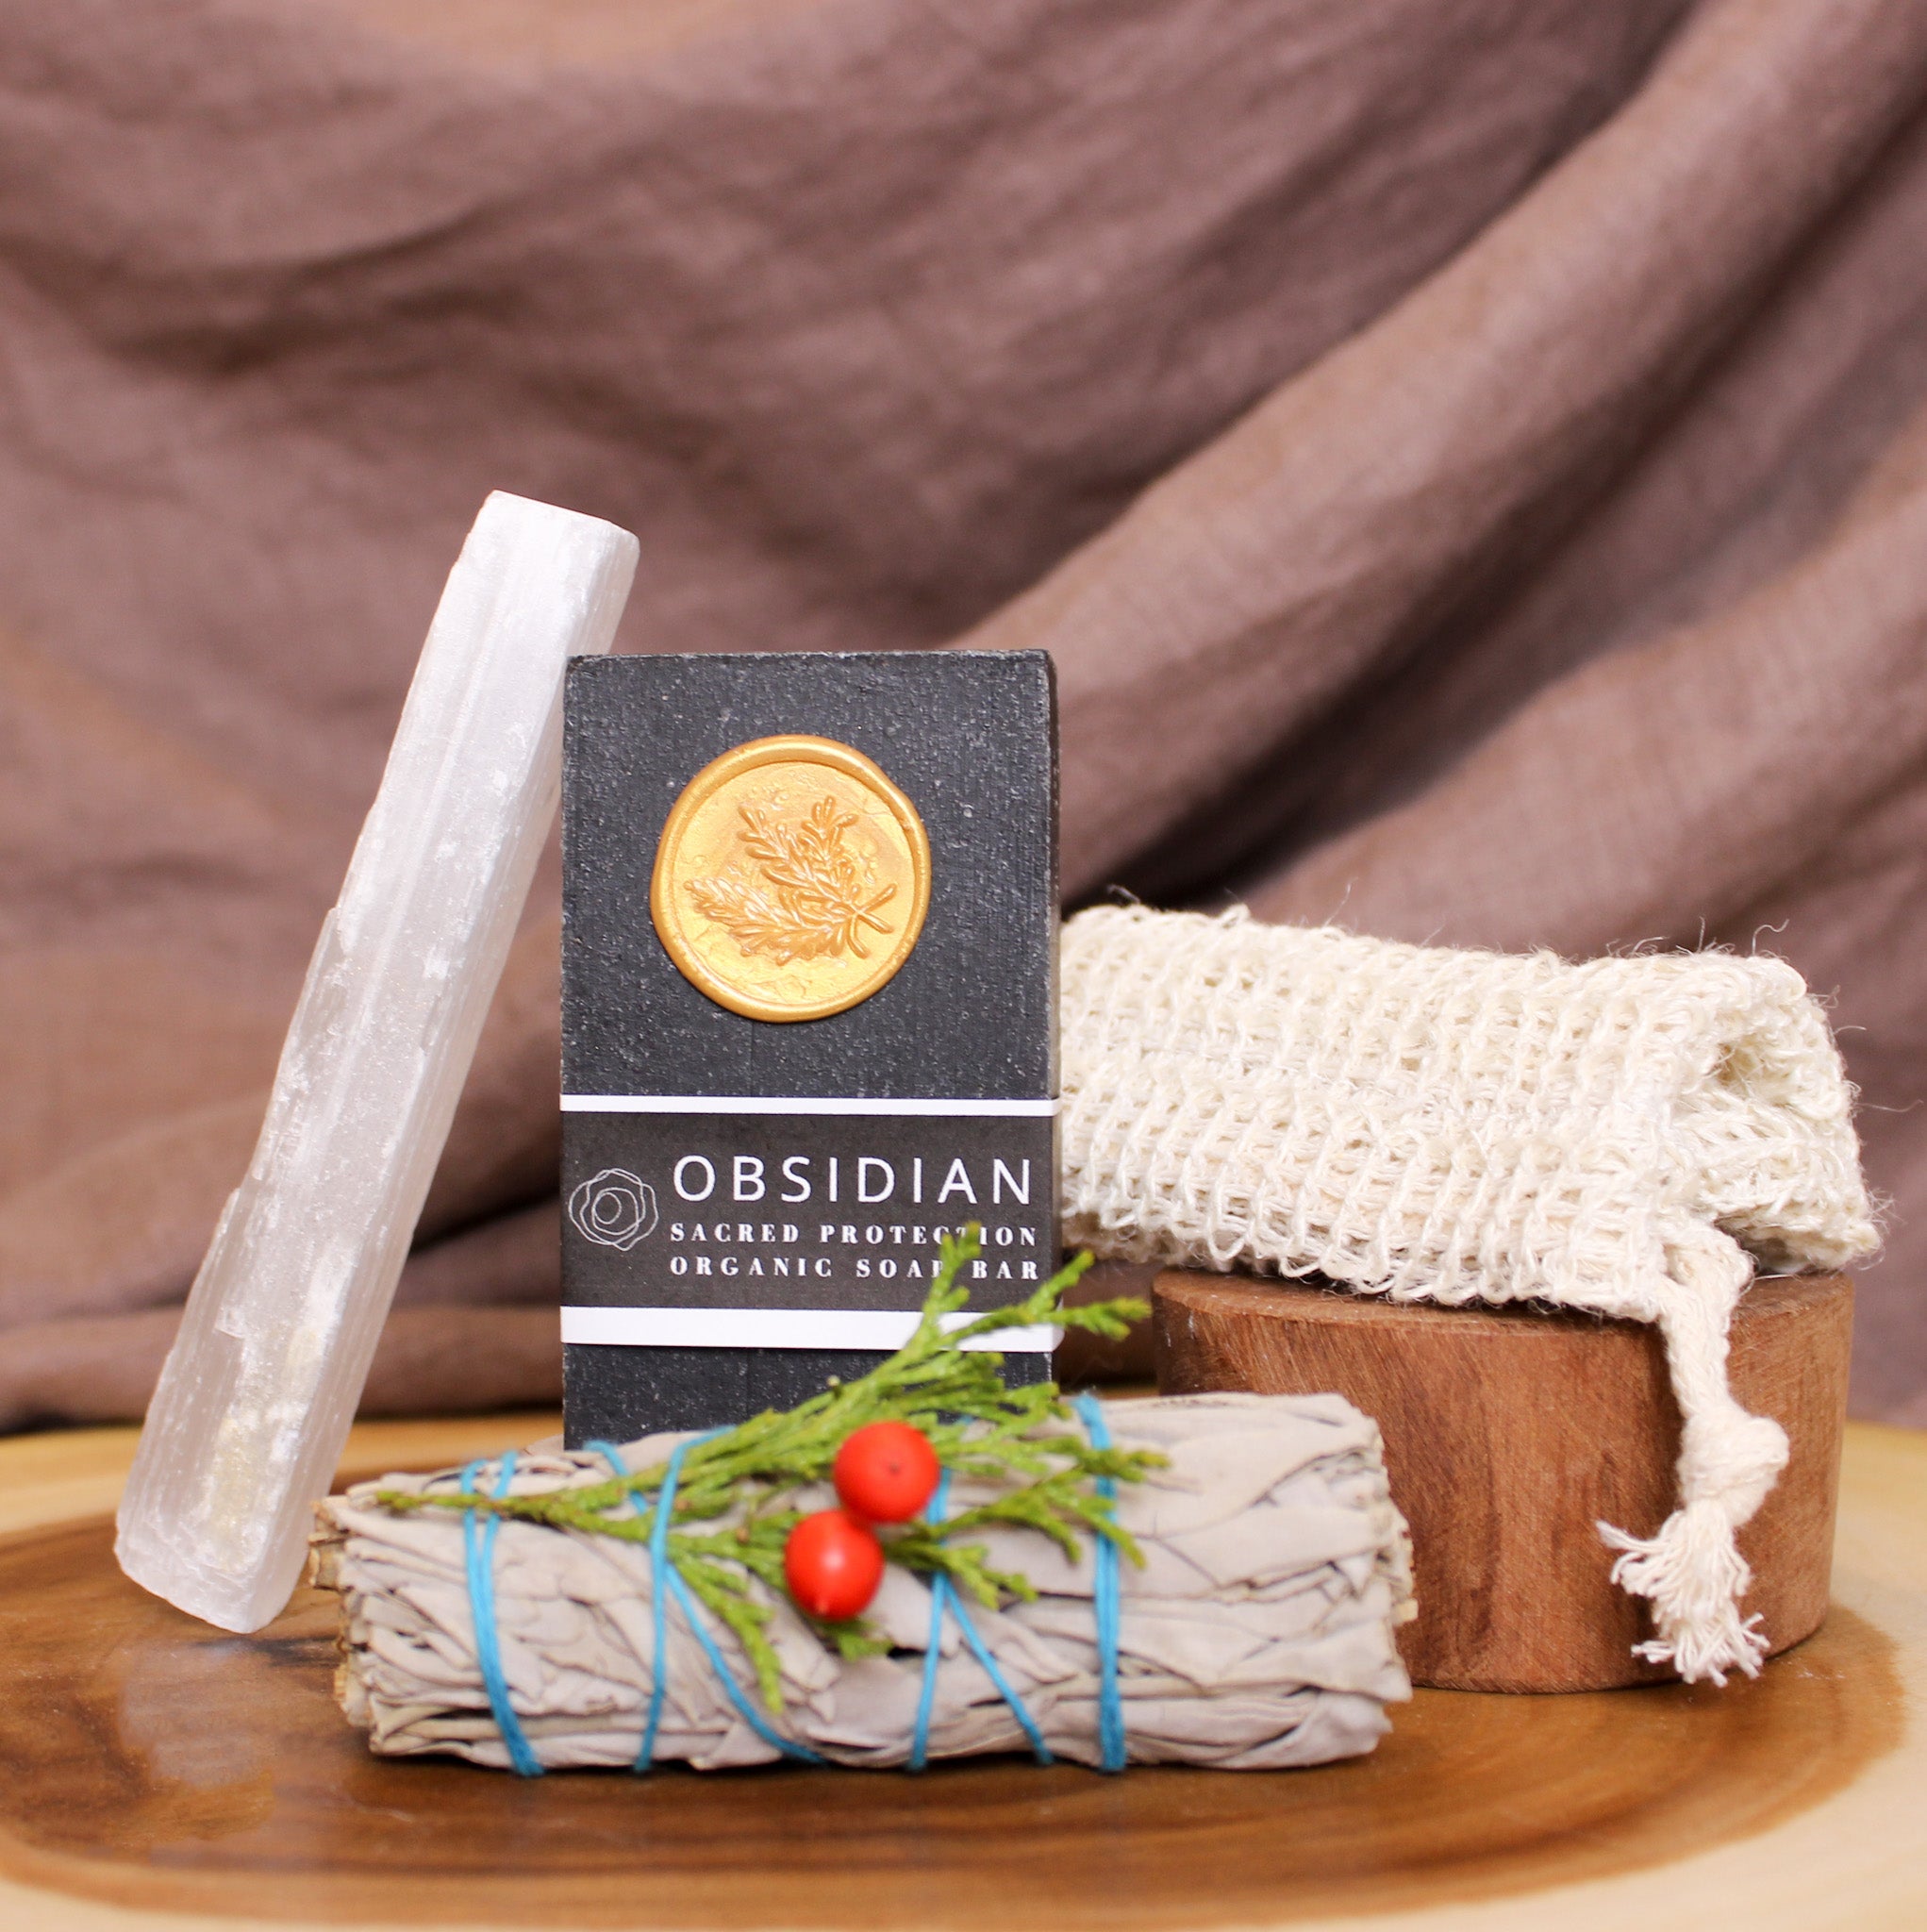 Spiritual Protection Gift Set - Handmade with Natural Ingredients. Hidden Forest Naturals